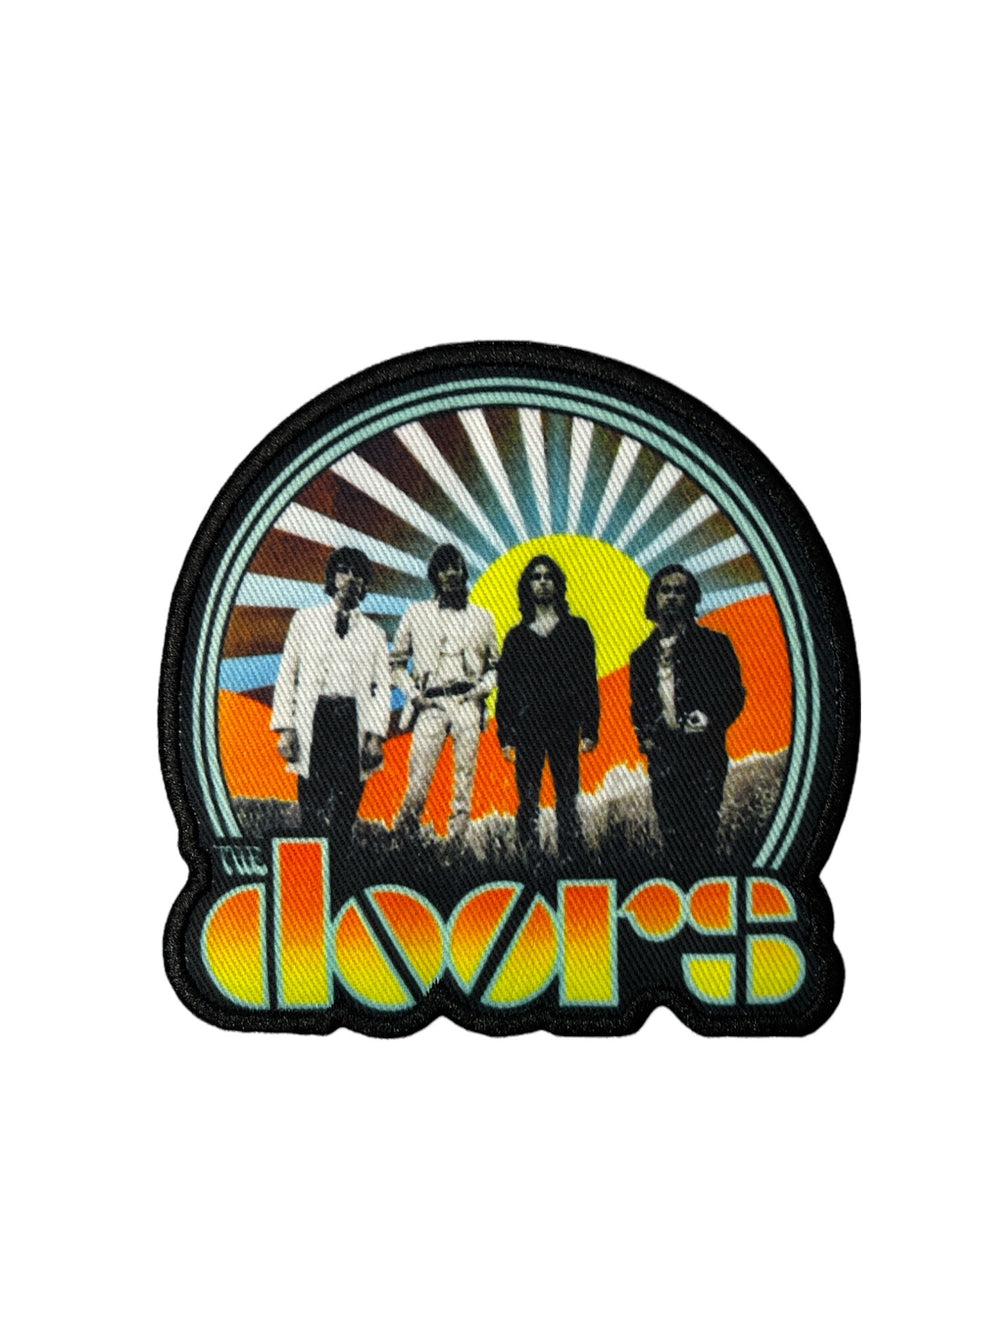 Doors The - Sunrise Official Woven Patch Brand New Official Jim Morrison